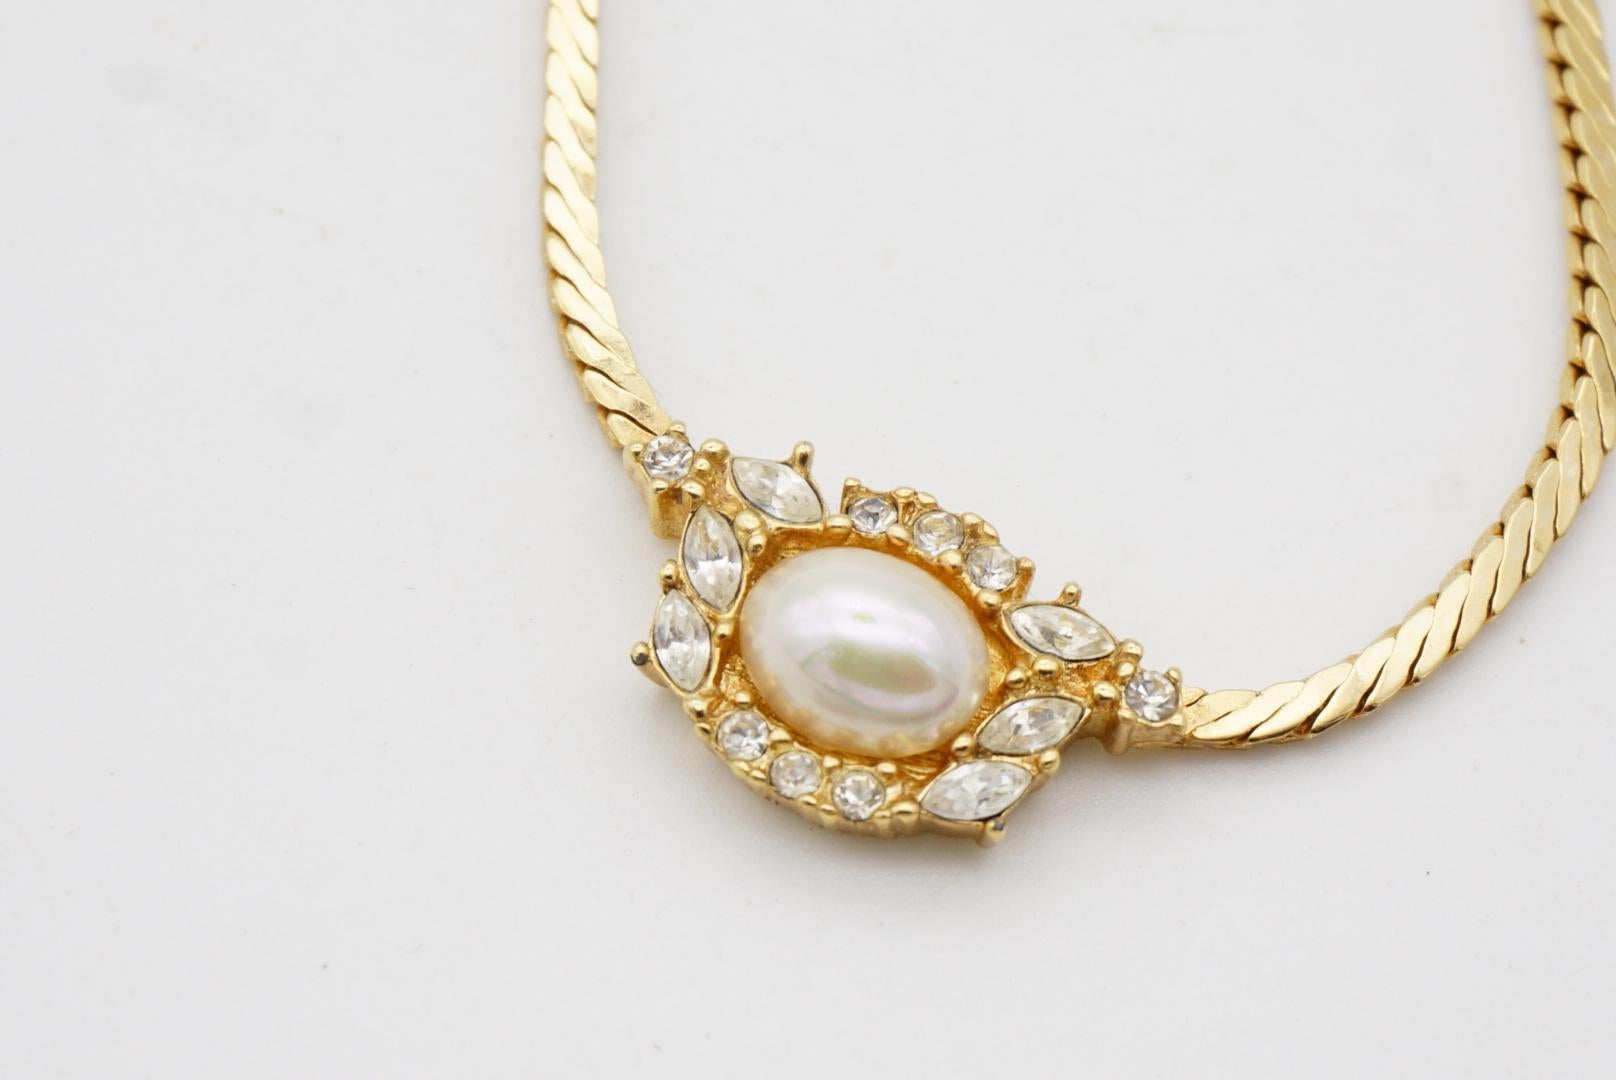 Christian Dior Vintage 1980s Oval Pearl Flower Crystals Gold Pendant Necklace For Sale 2